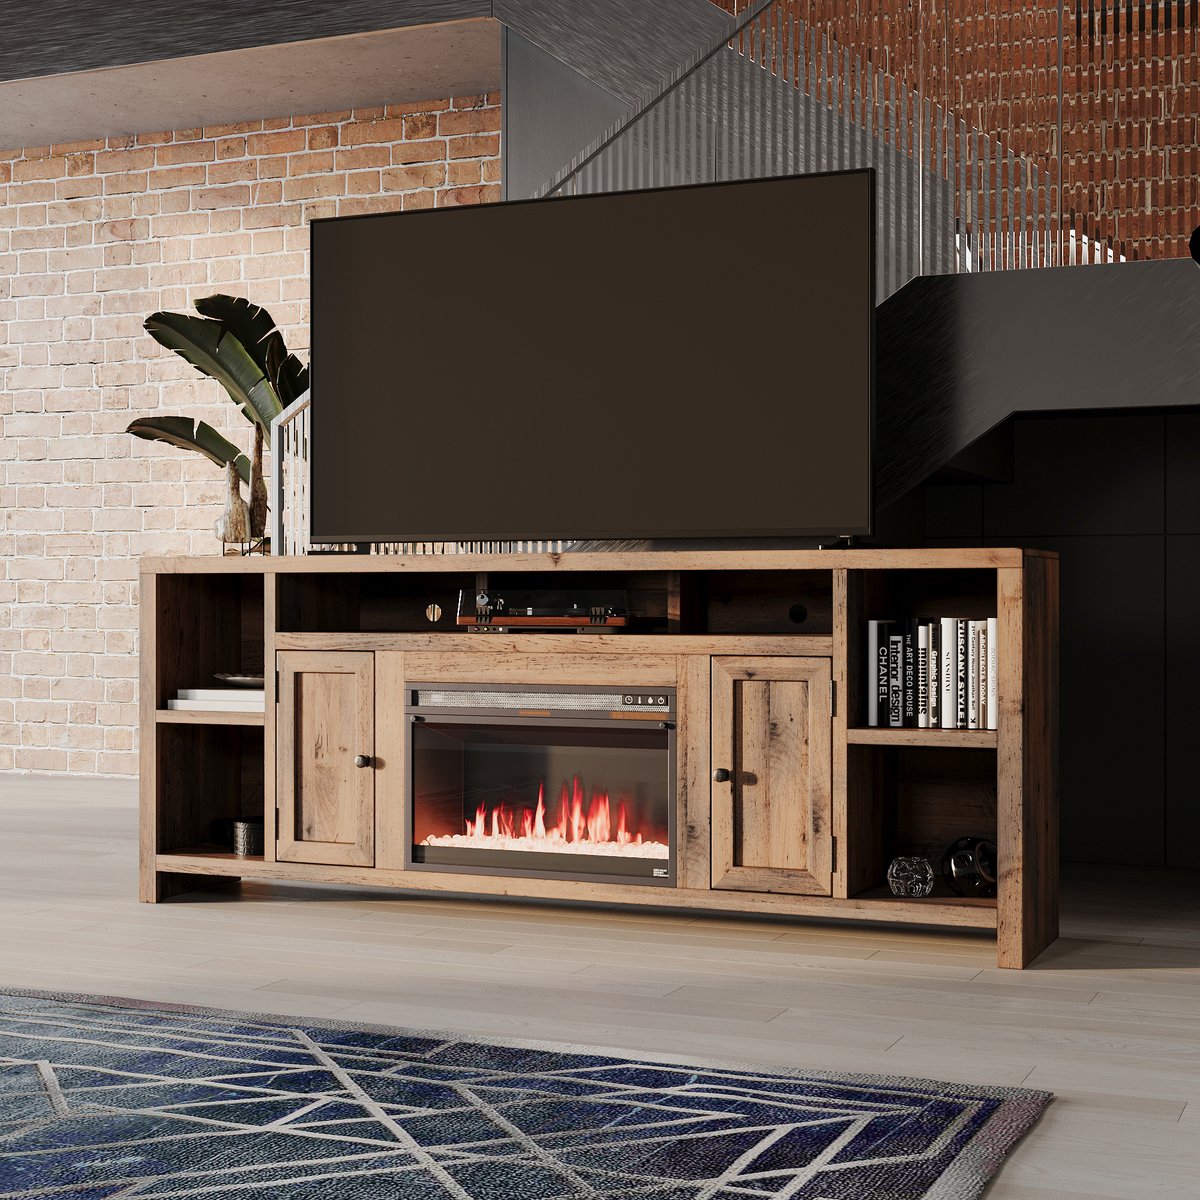 Upgrade your entertainment space with the Joshua Creek 84'' Fireplace TV Console! Adds warmth with a built-in fireplace and available financing makes it easy to own. Discover more at: galleryfurniture.biz/3WkjuTV